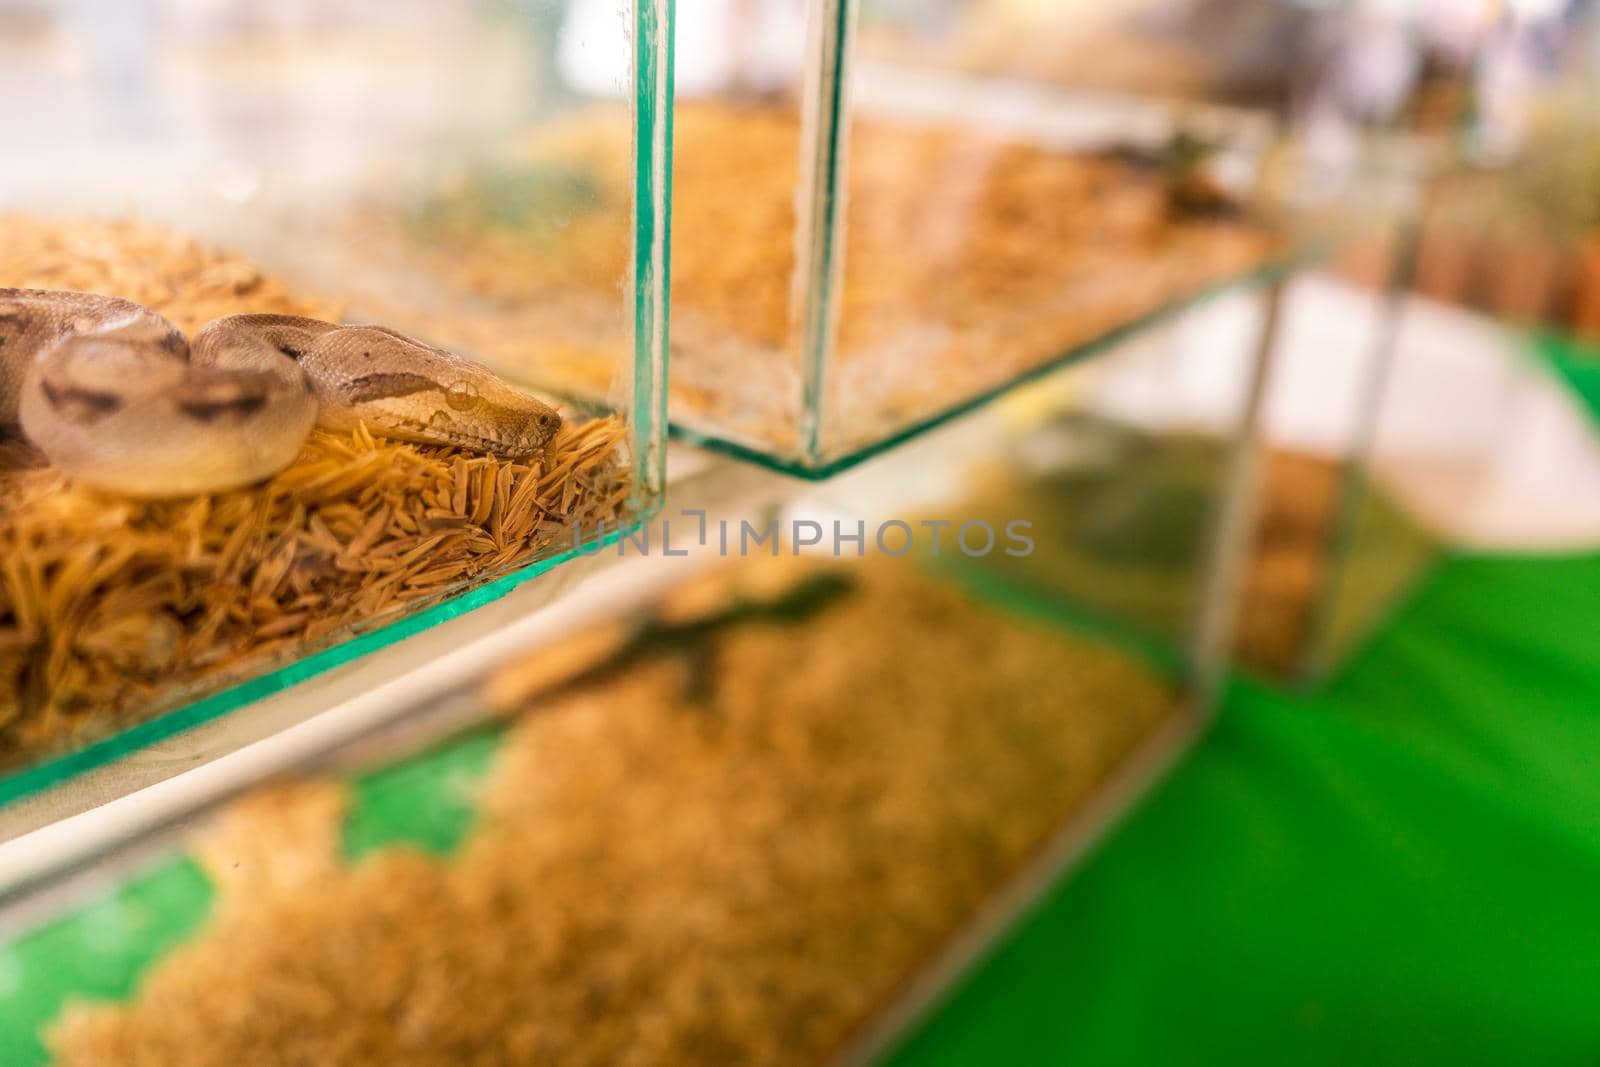 Baby boa inside a glass tank at an exotic animal pet store in Managua, Nicaragua